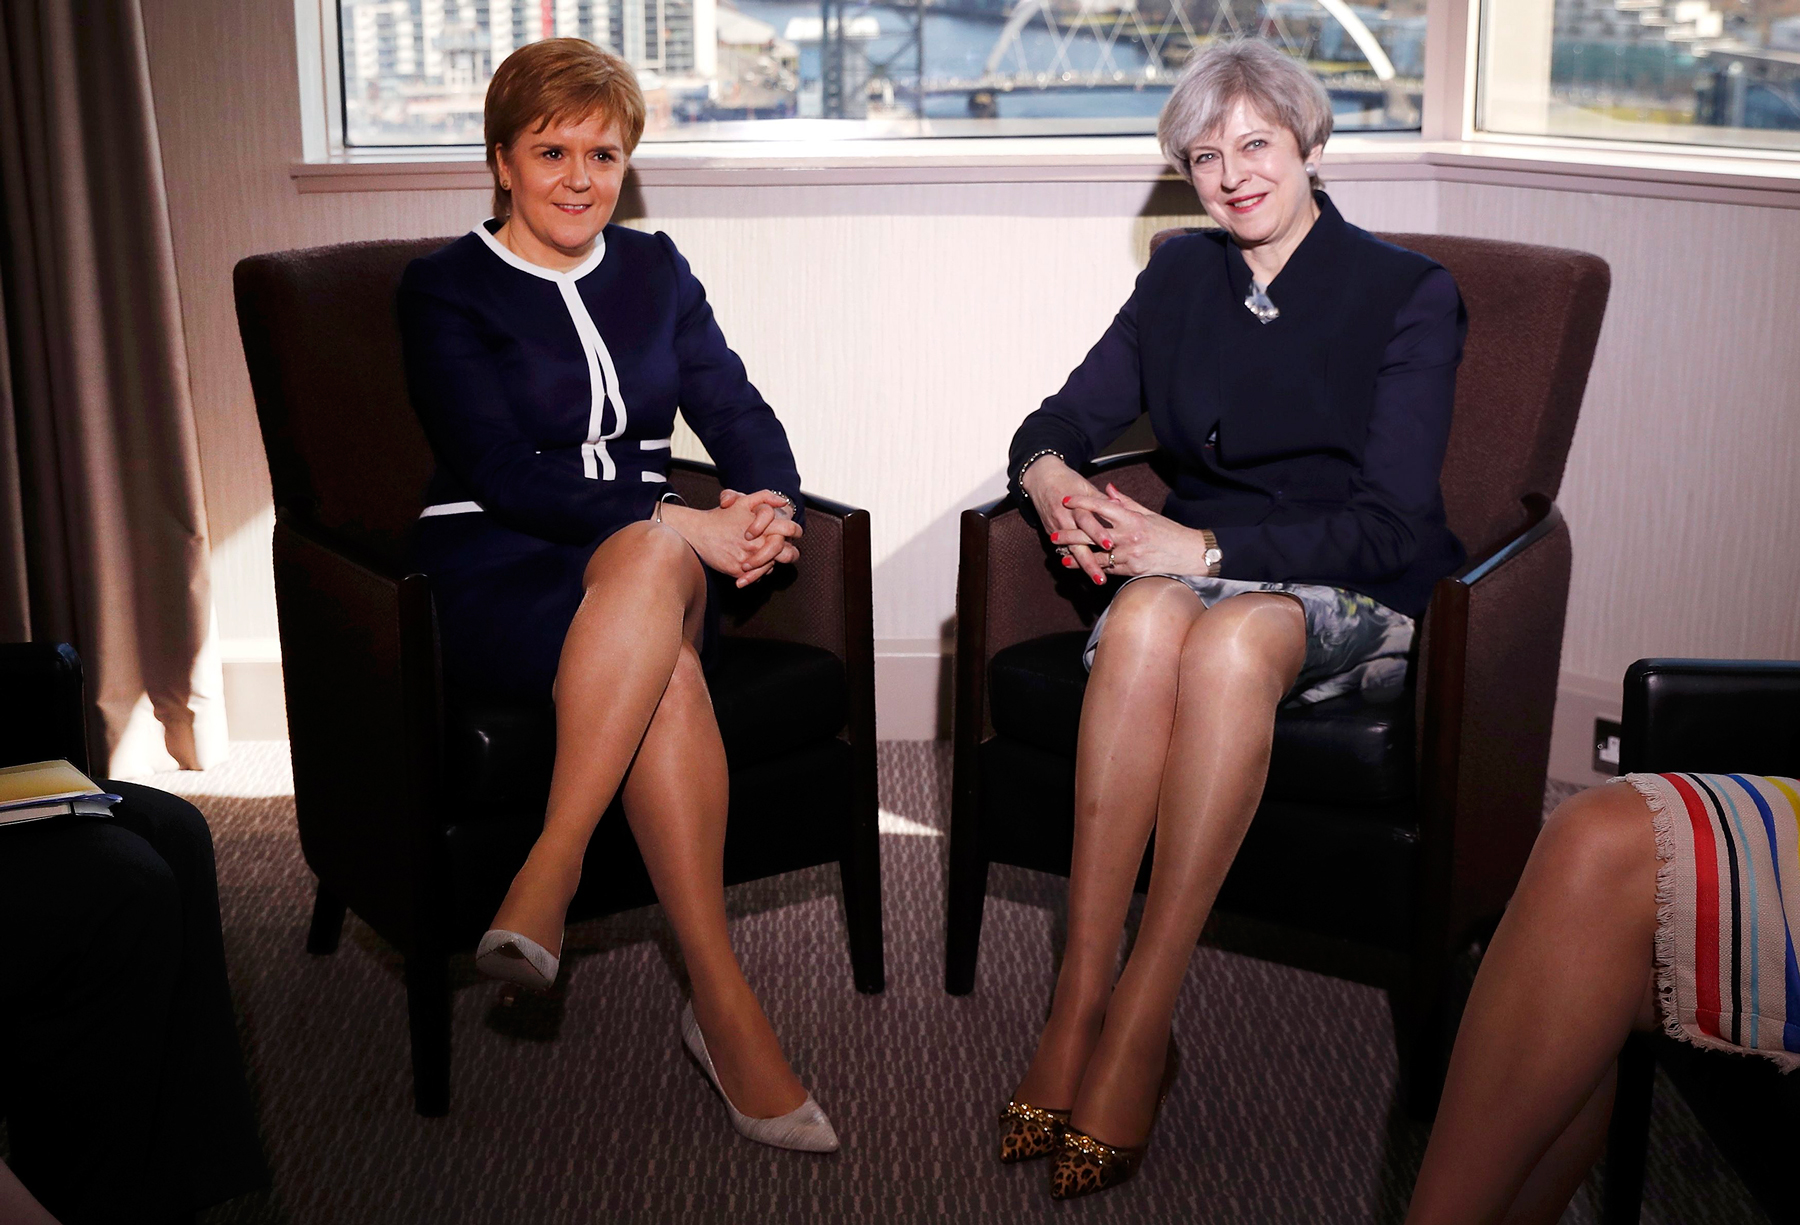 British Prime Minister Theresa May meets with Scottish First Minister Nicola Sturgeon at the Crown Plaza Hotel in Glasgow, Scotland, on March 27, 2017. (Russell Cheyne—WPA Pool/Getty Images)